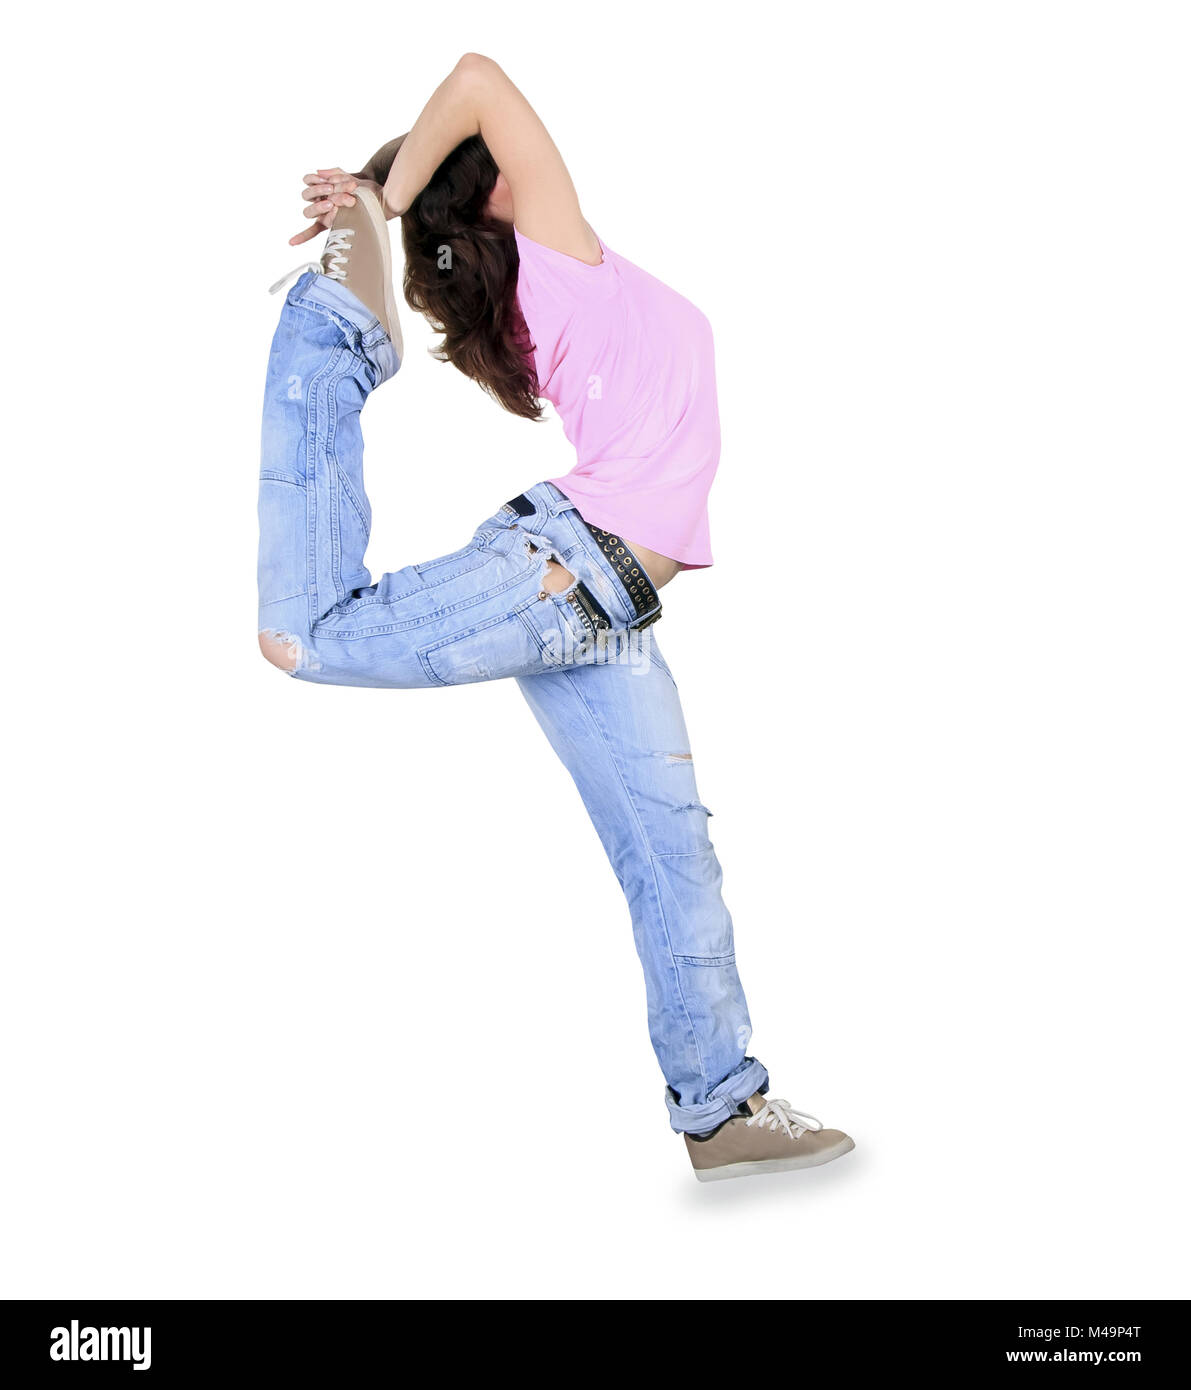 Teenager dance breakdance in action over white Stock Photo